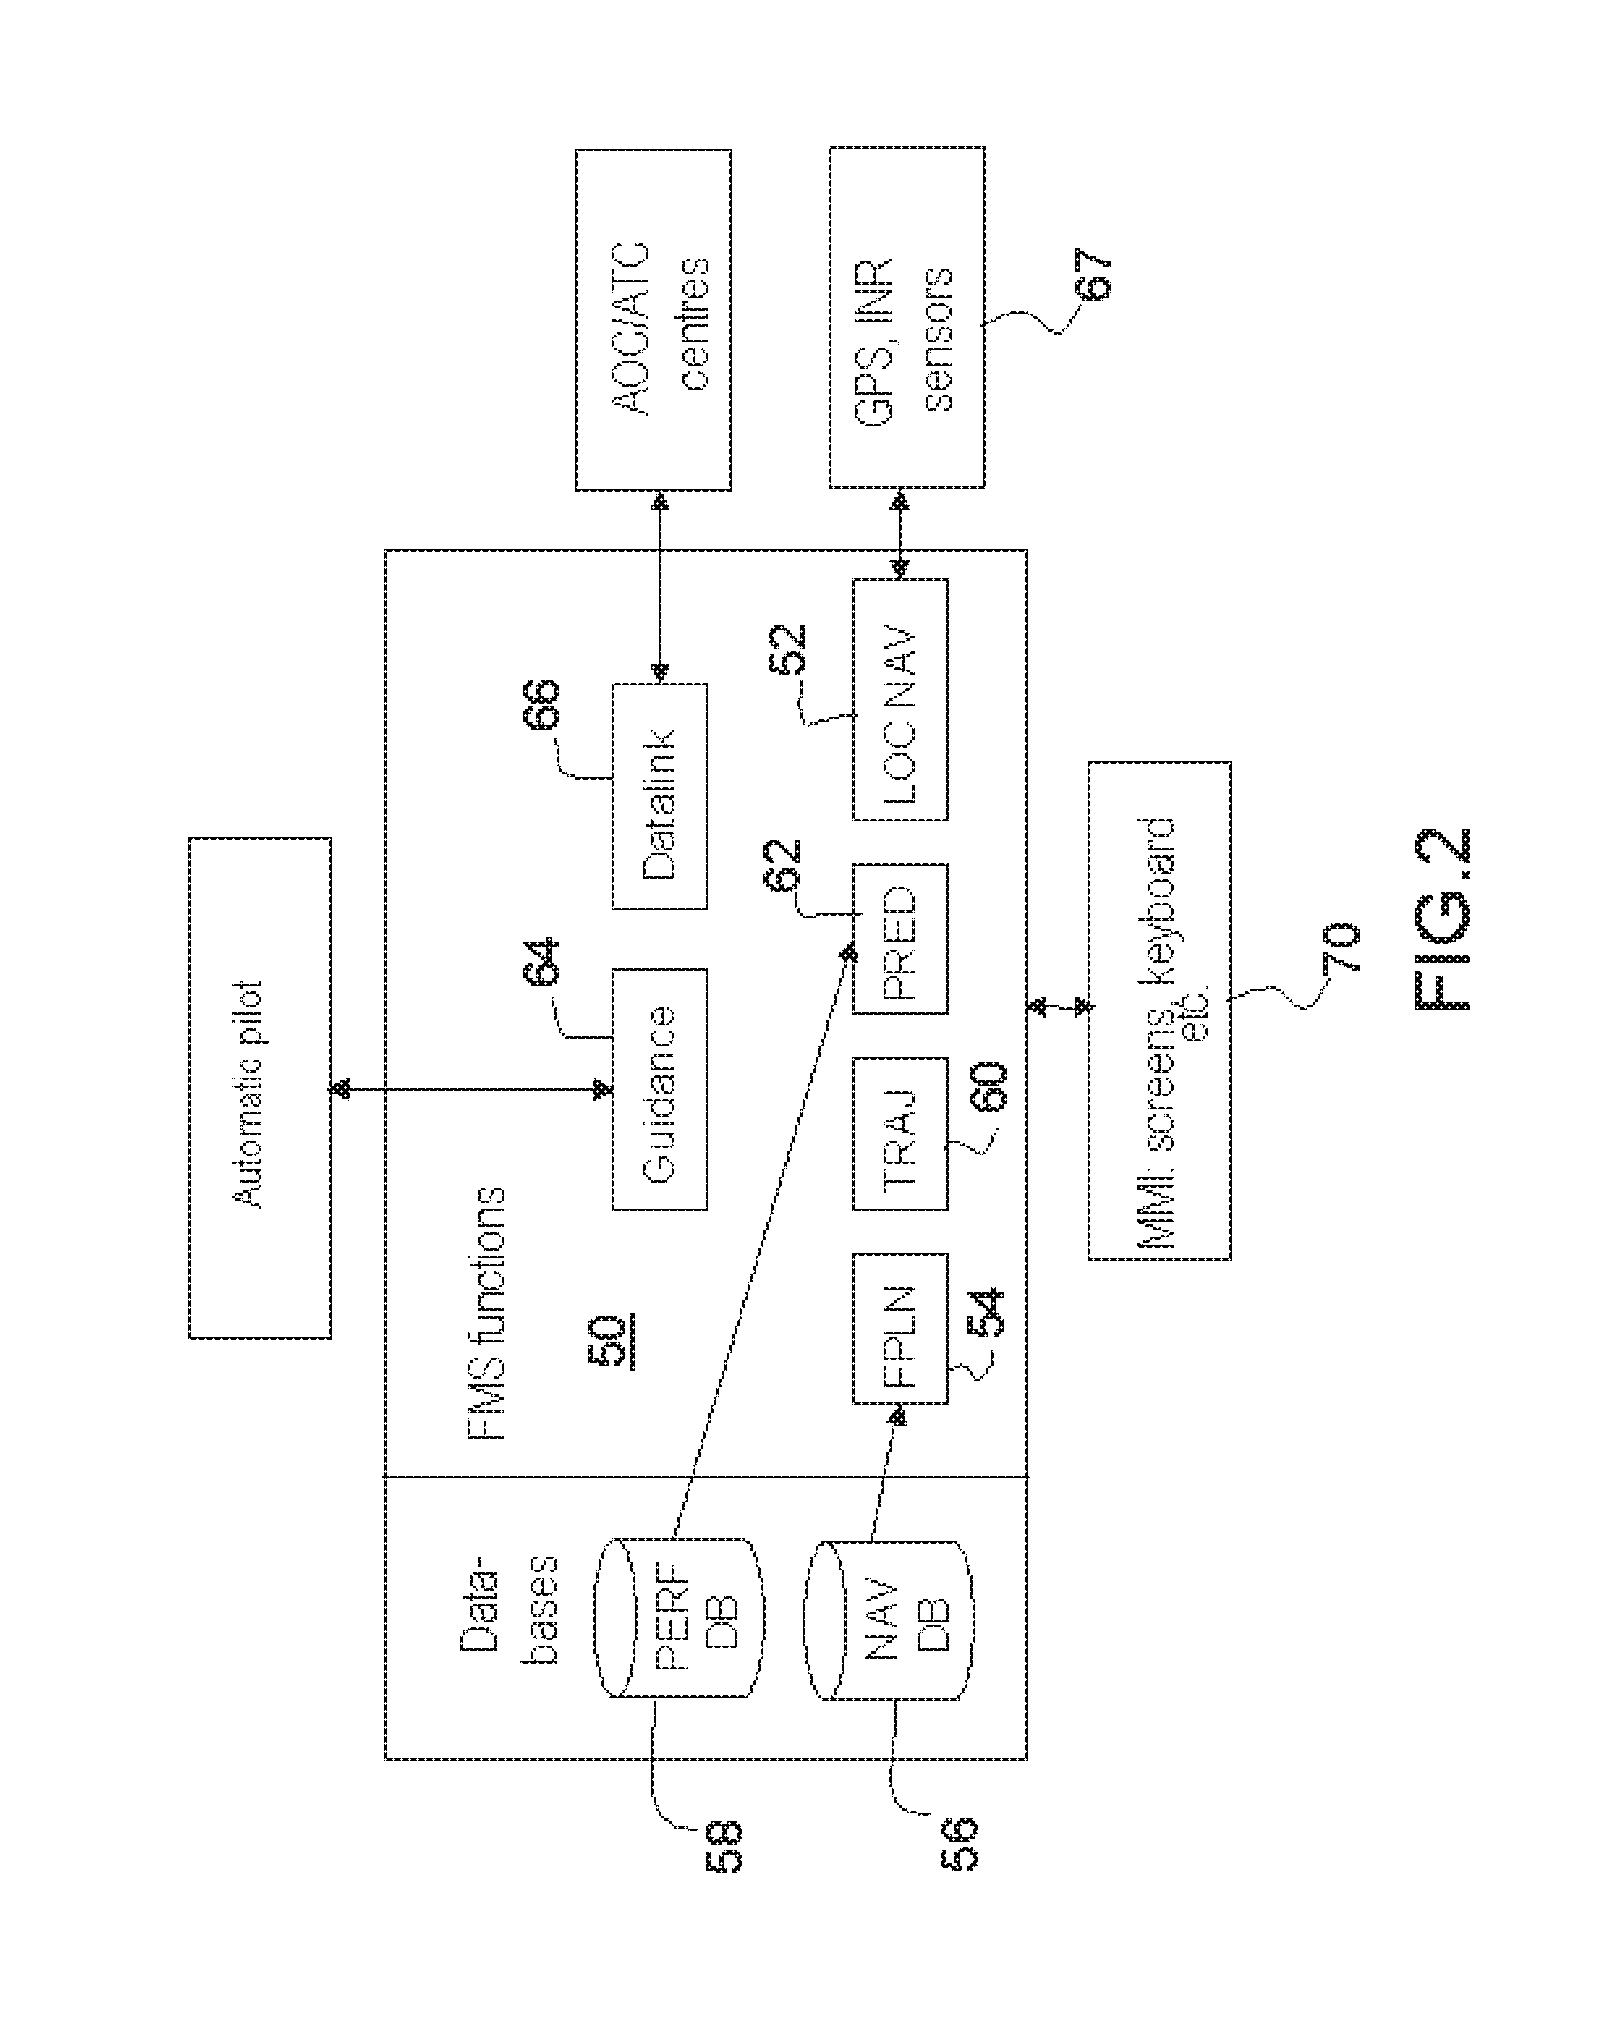 Method for integrating a new service into an avionics onboard system with open architecture of client-server type, in particular for an fim manoeuvre service